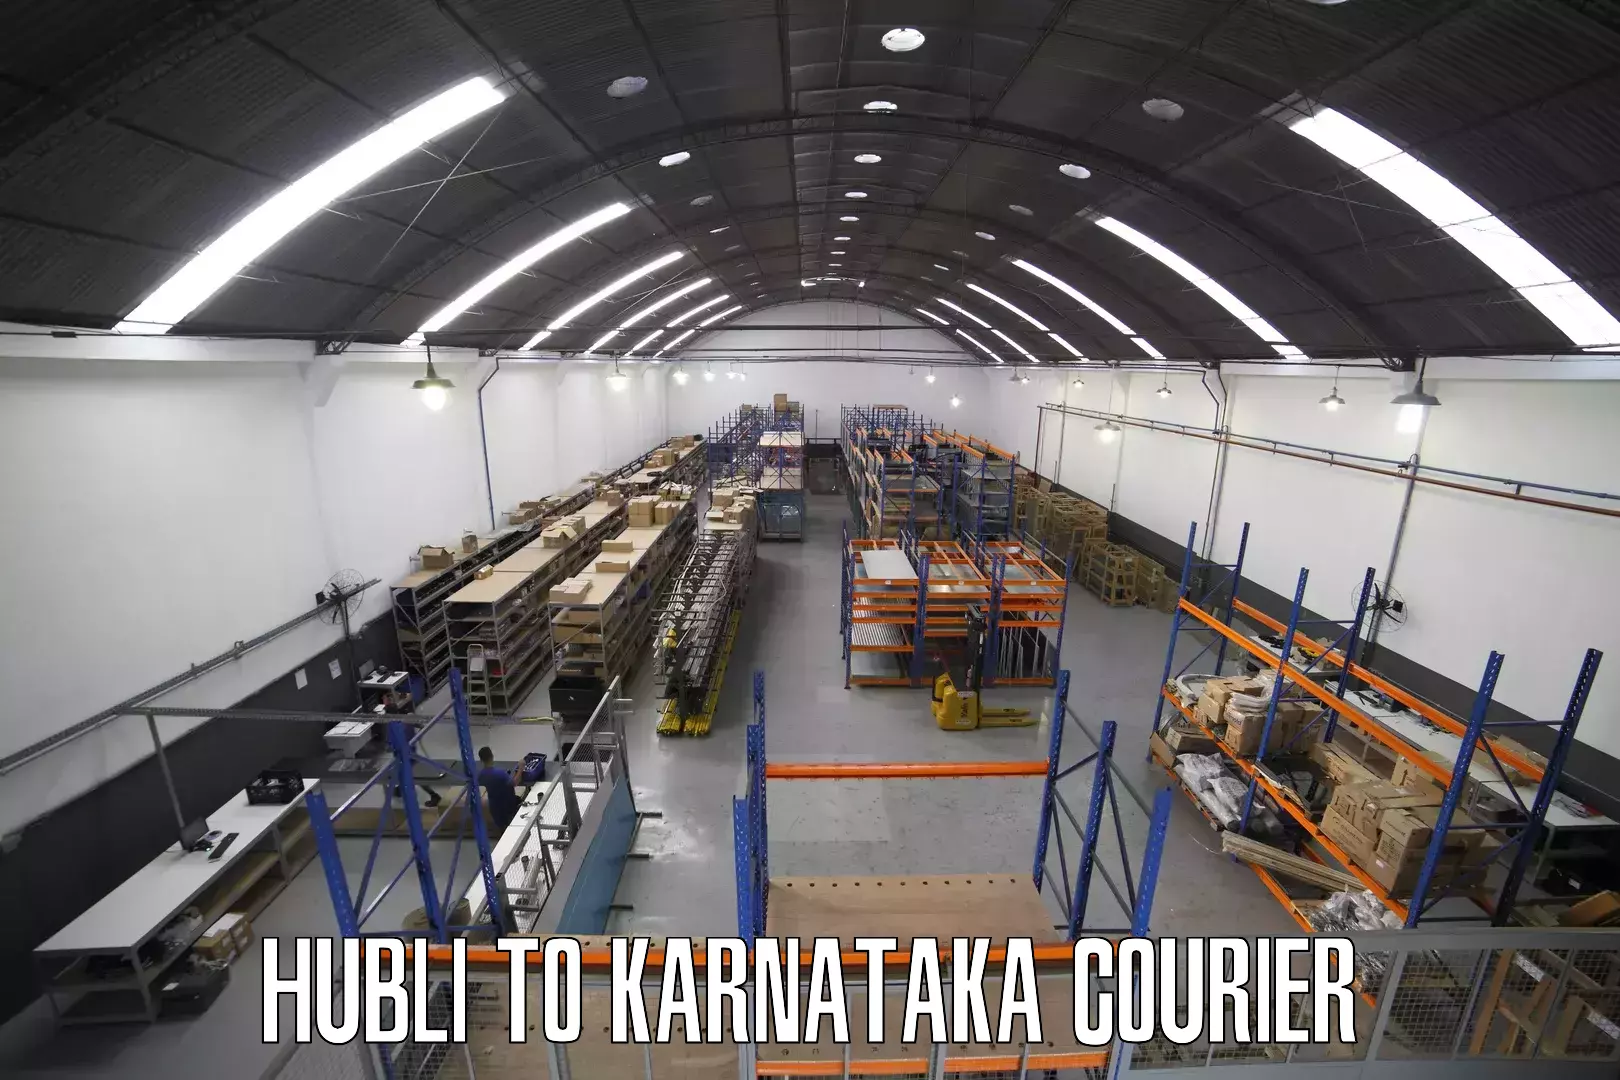 Subscription-based courier Hubli to Channapatna